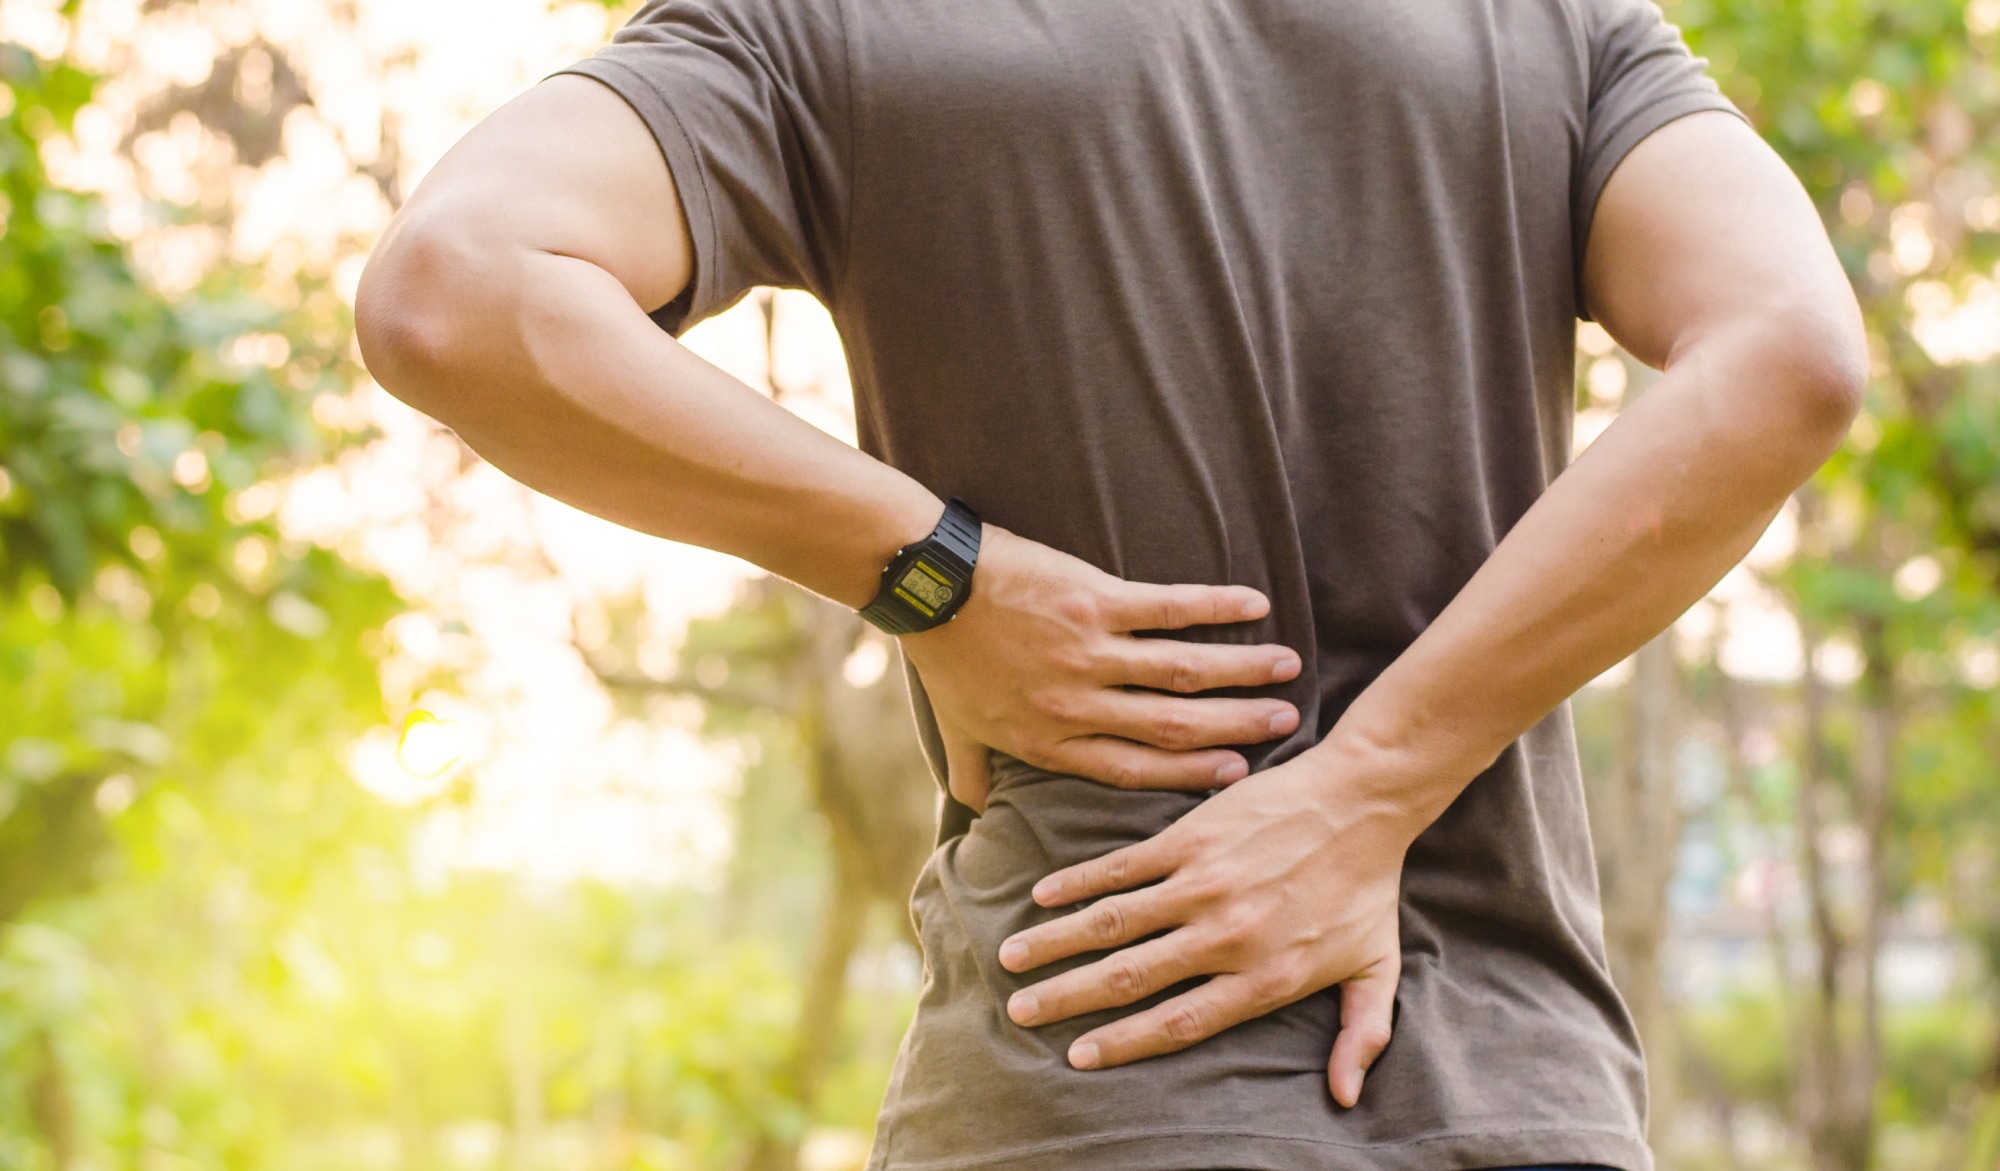 Study: Cognitive functional therapy with or without movement sensor biofeedback versus usual care for chronic, disabling low back pain (RESTORE): a randomised, controlled, three-arm, parallel group, phase 3, clinical trial. Image Credit: TBstudio/Shutterstock.com